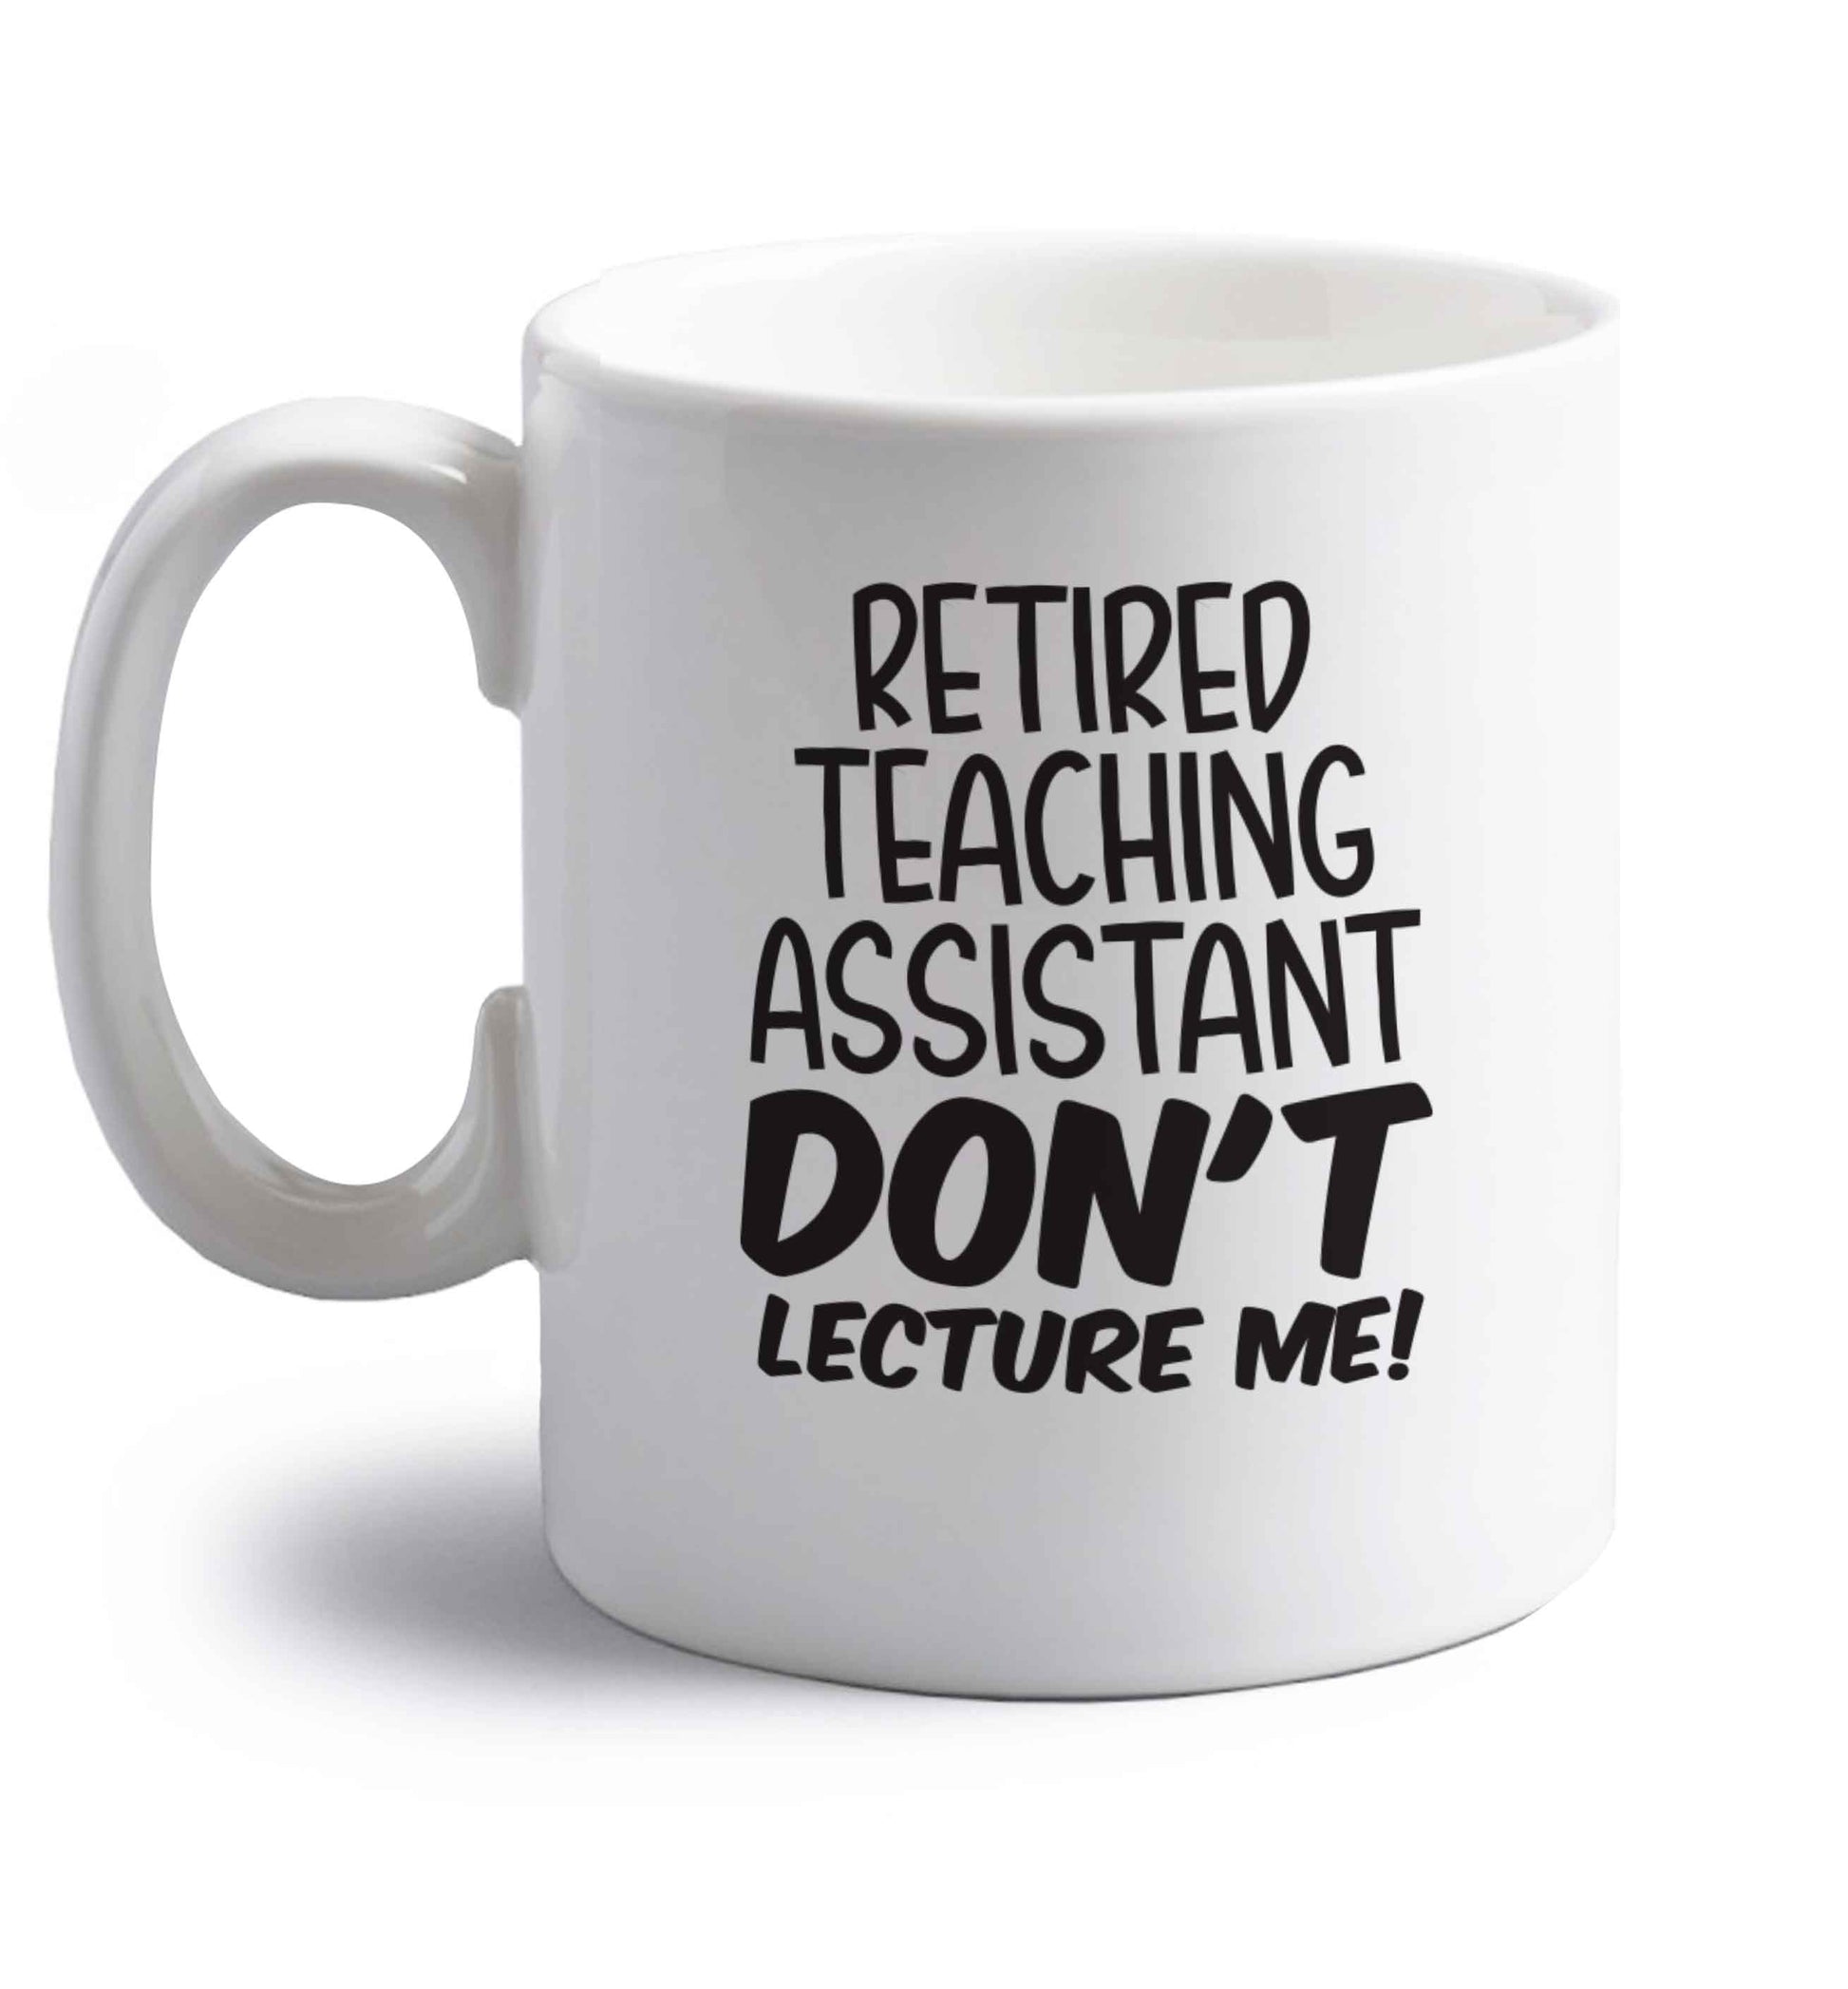 Retired teaching assistant don't lecture me right handed white ceramic mug 